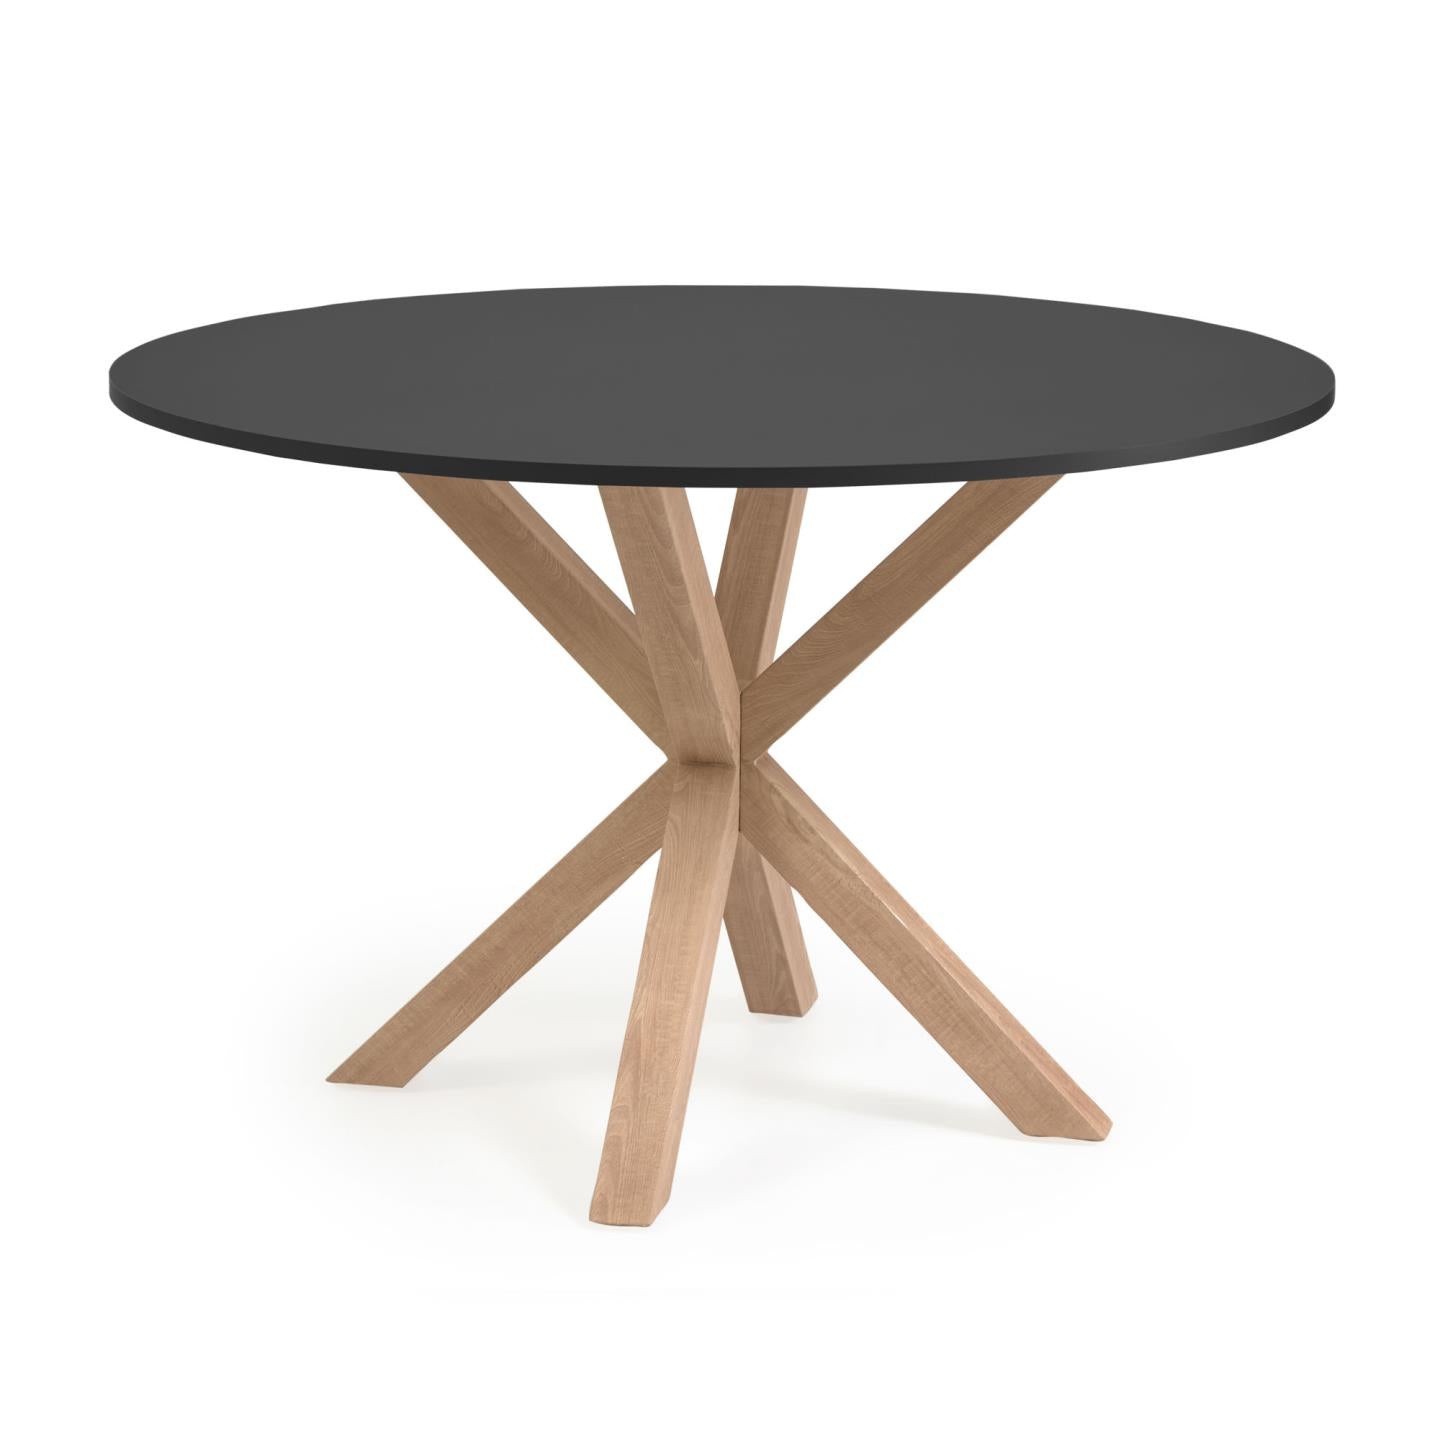 Full Argo round Ø 119 cm black laquered DM table with steel legs with wood-effect finish